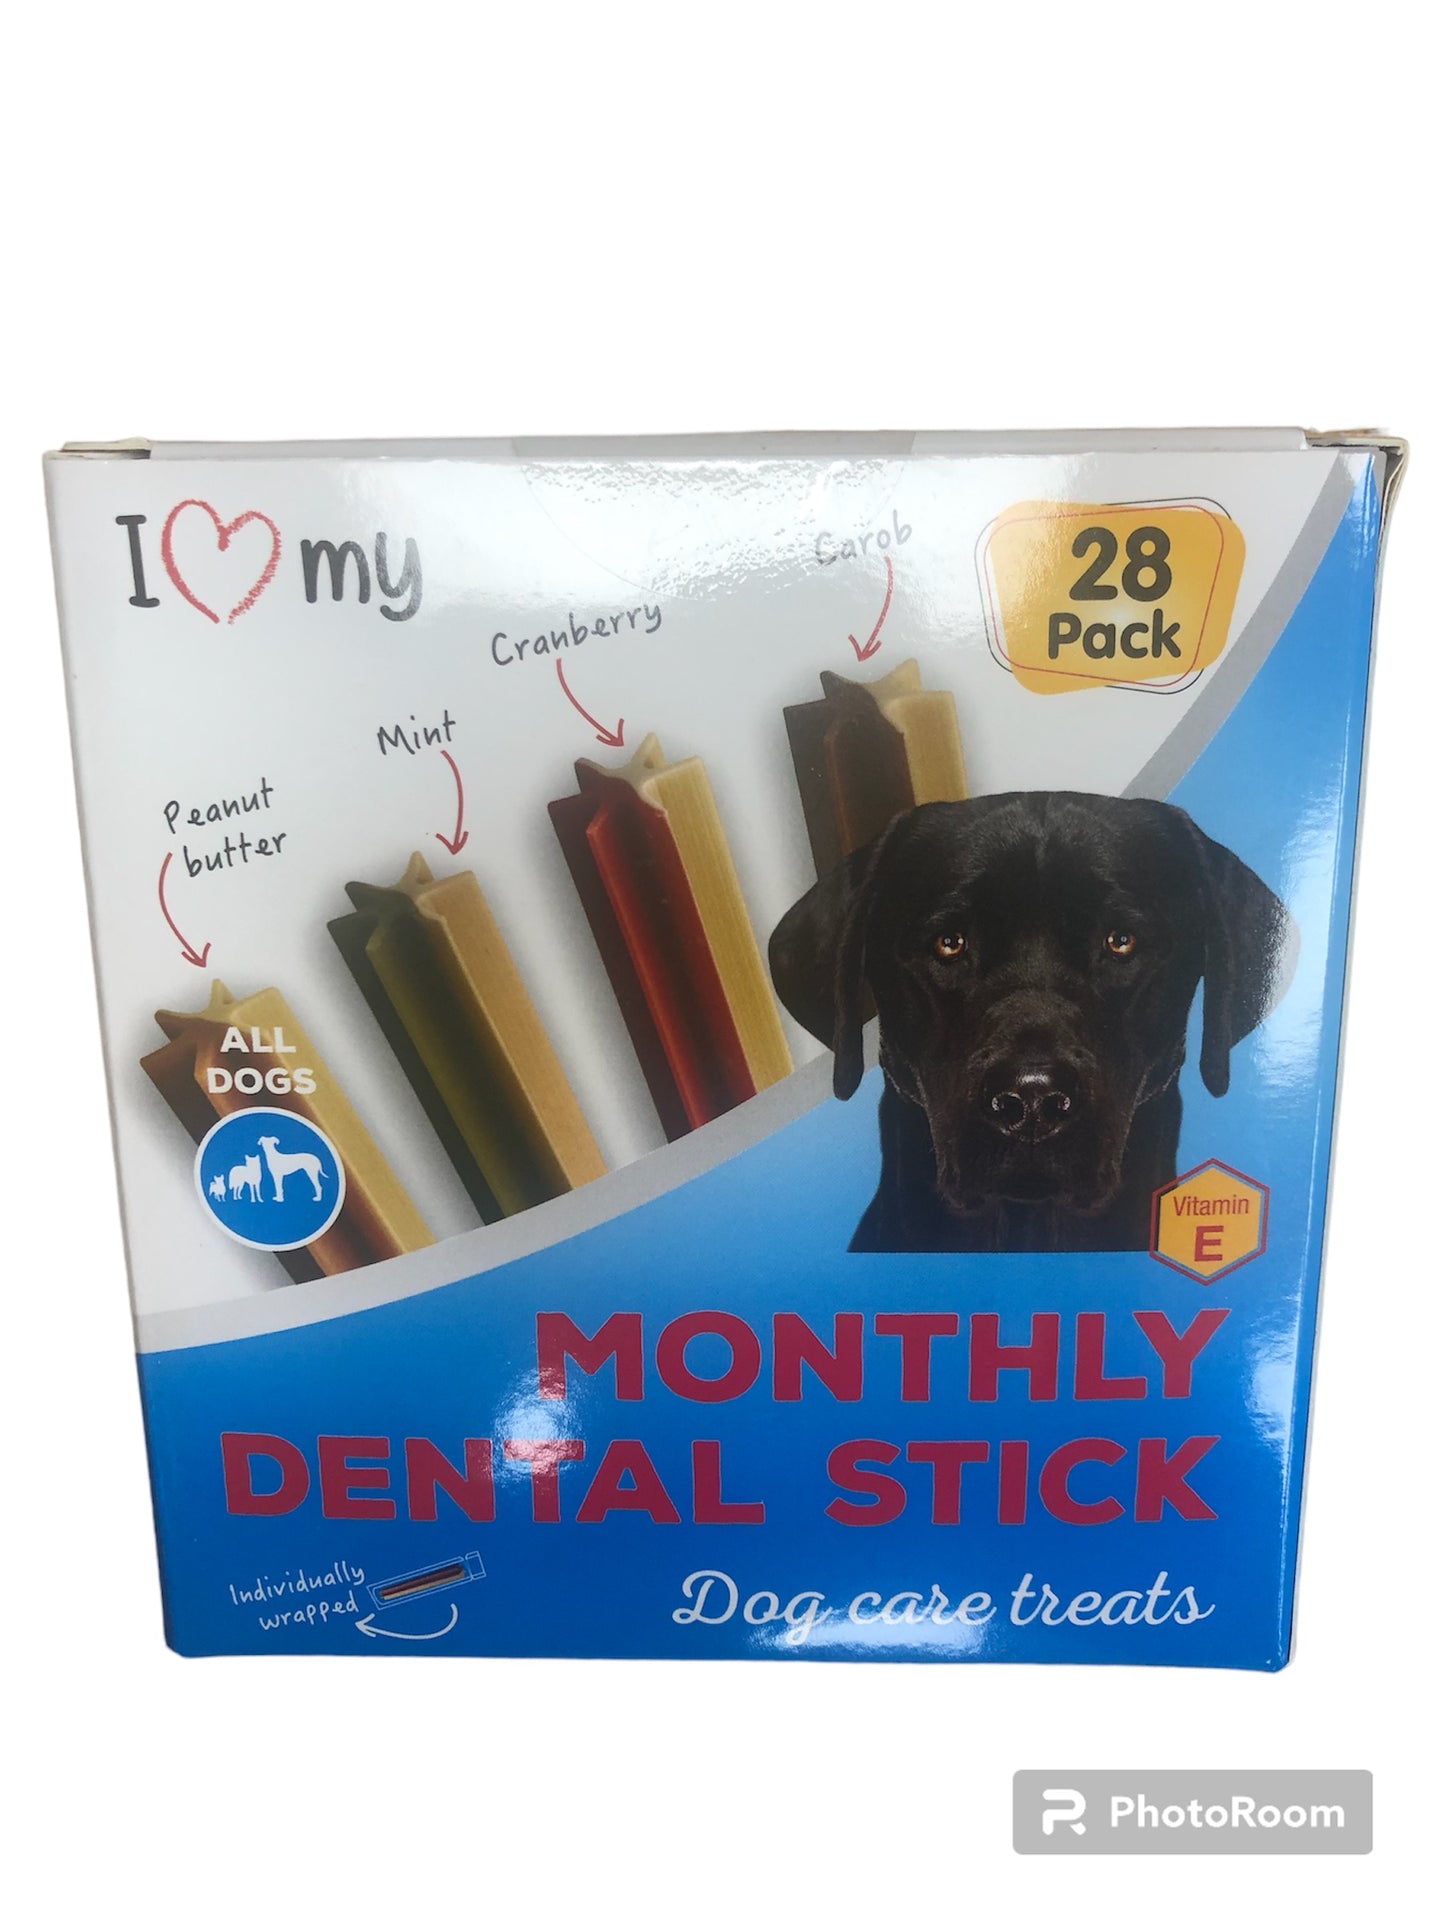 I ❤️ my monthly dental stick 10g x 28 packs in the box